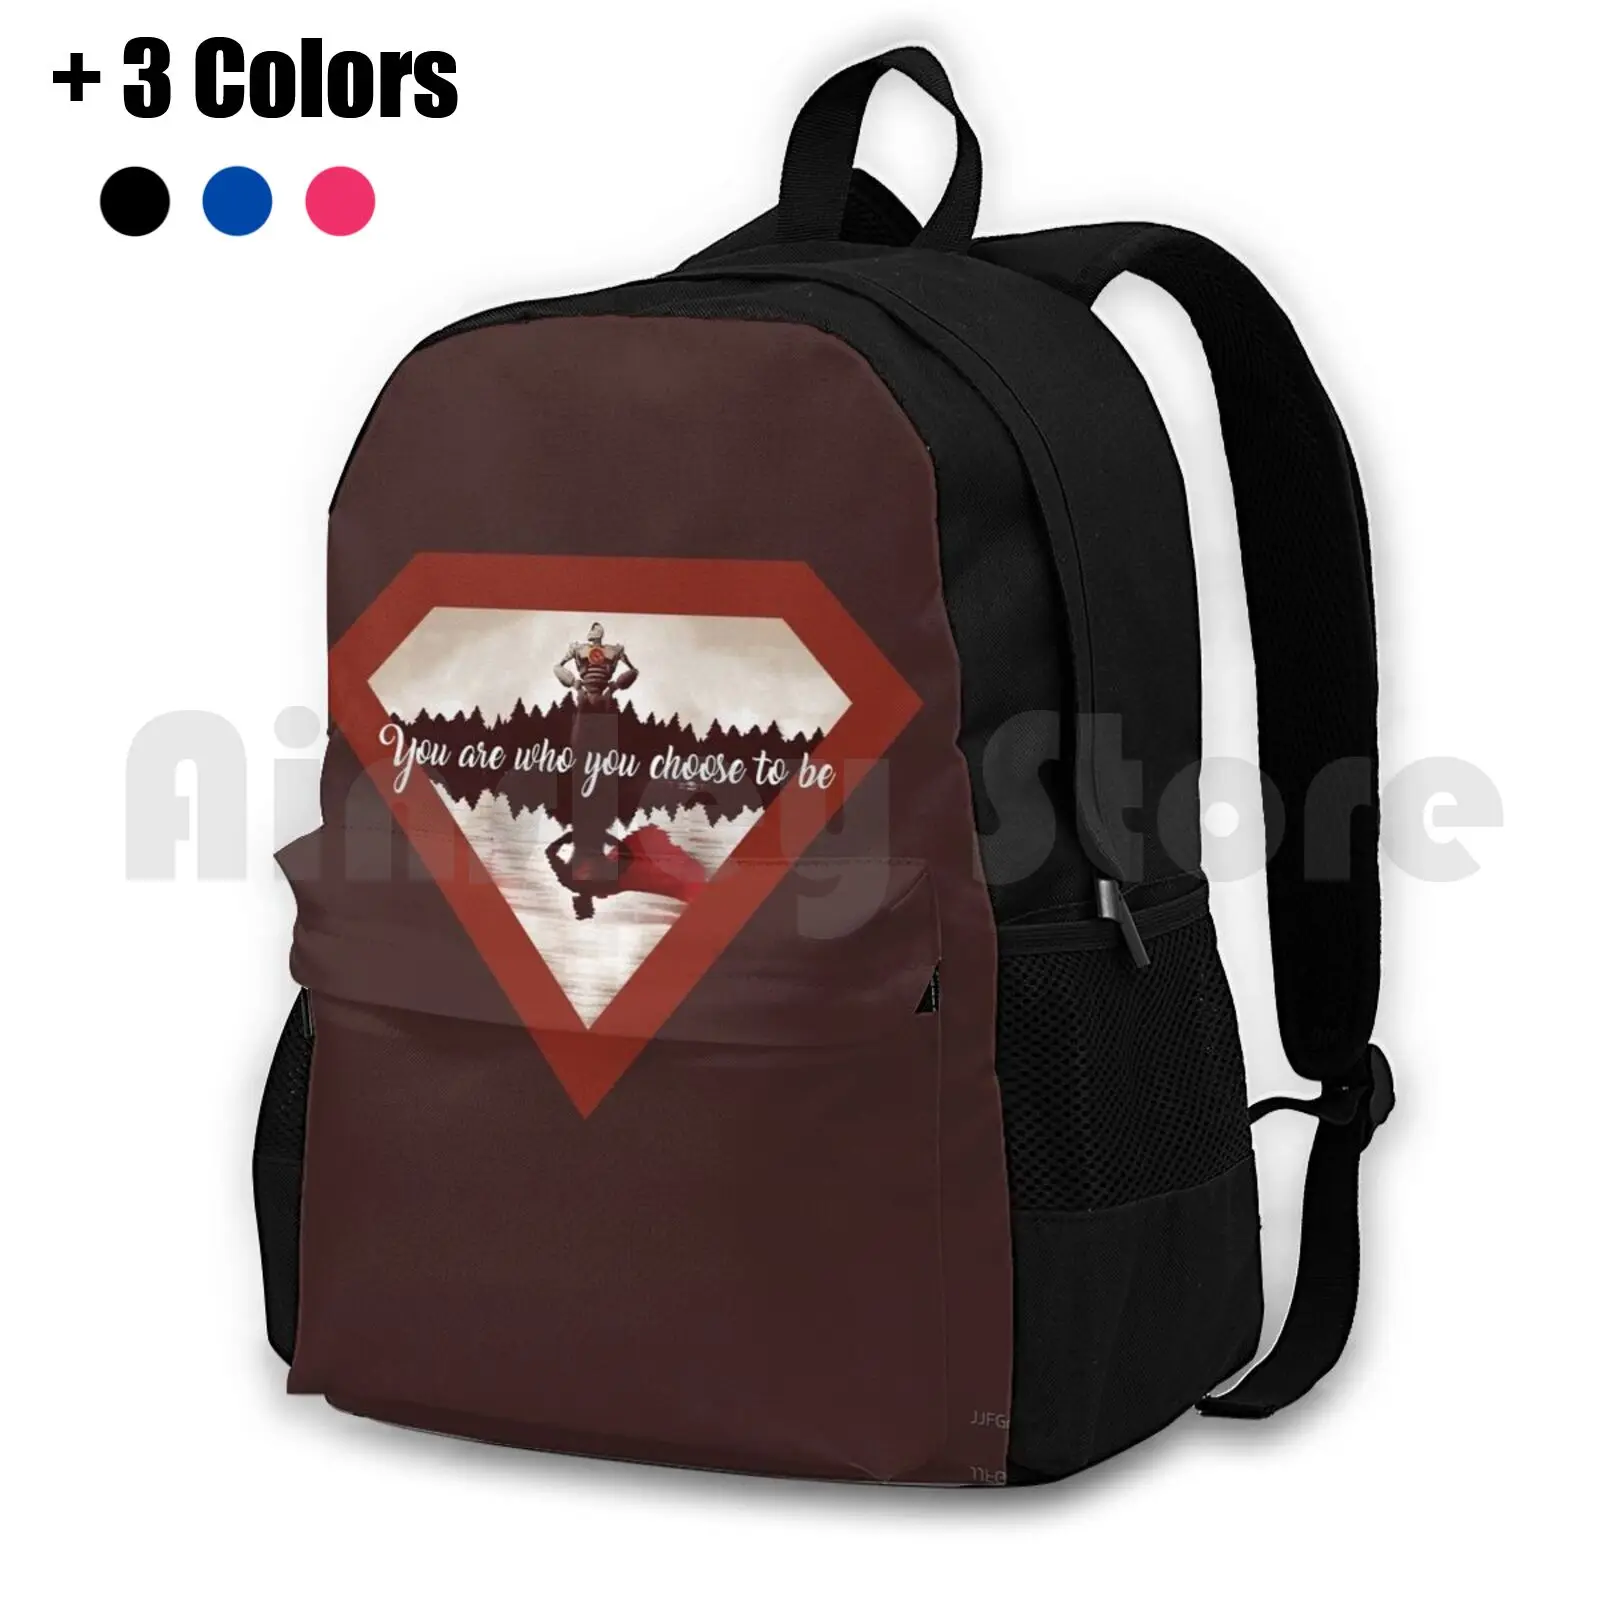 You Are Who You Choose To Be Outdoor Hiking Backpack Riding Climbing Sports Bag Iron Giant Movie Quotes Superhero Quotes Movie